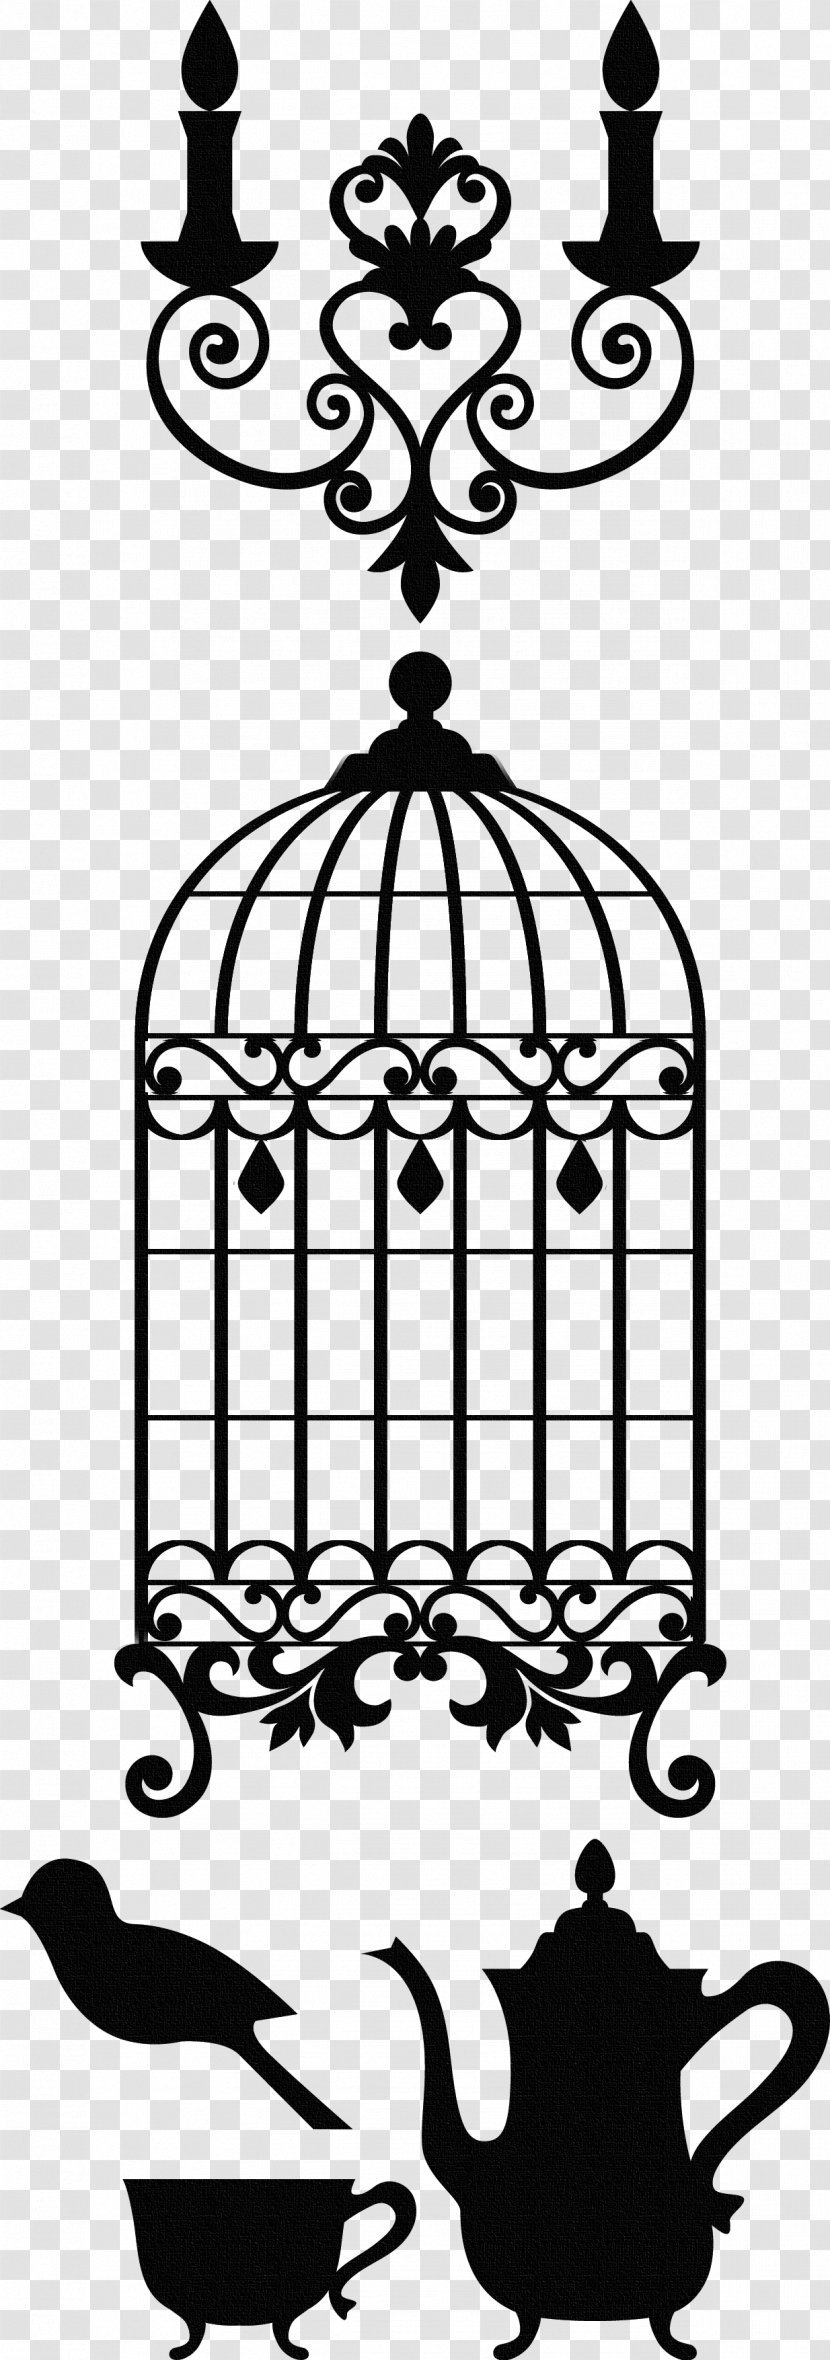 Table Antique Furniture Clip Art - Tree - Black Silhouette Of A Birdcage Lamp Transparent PNG